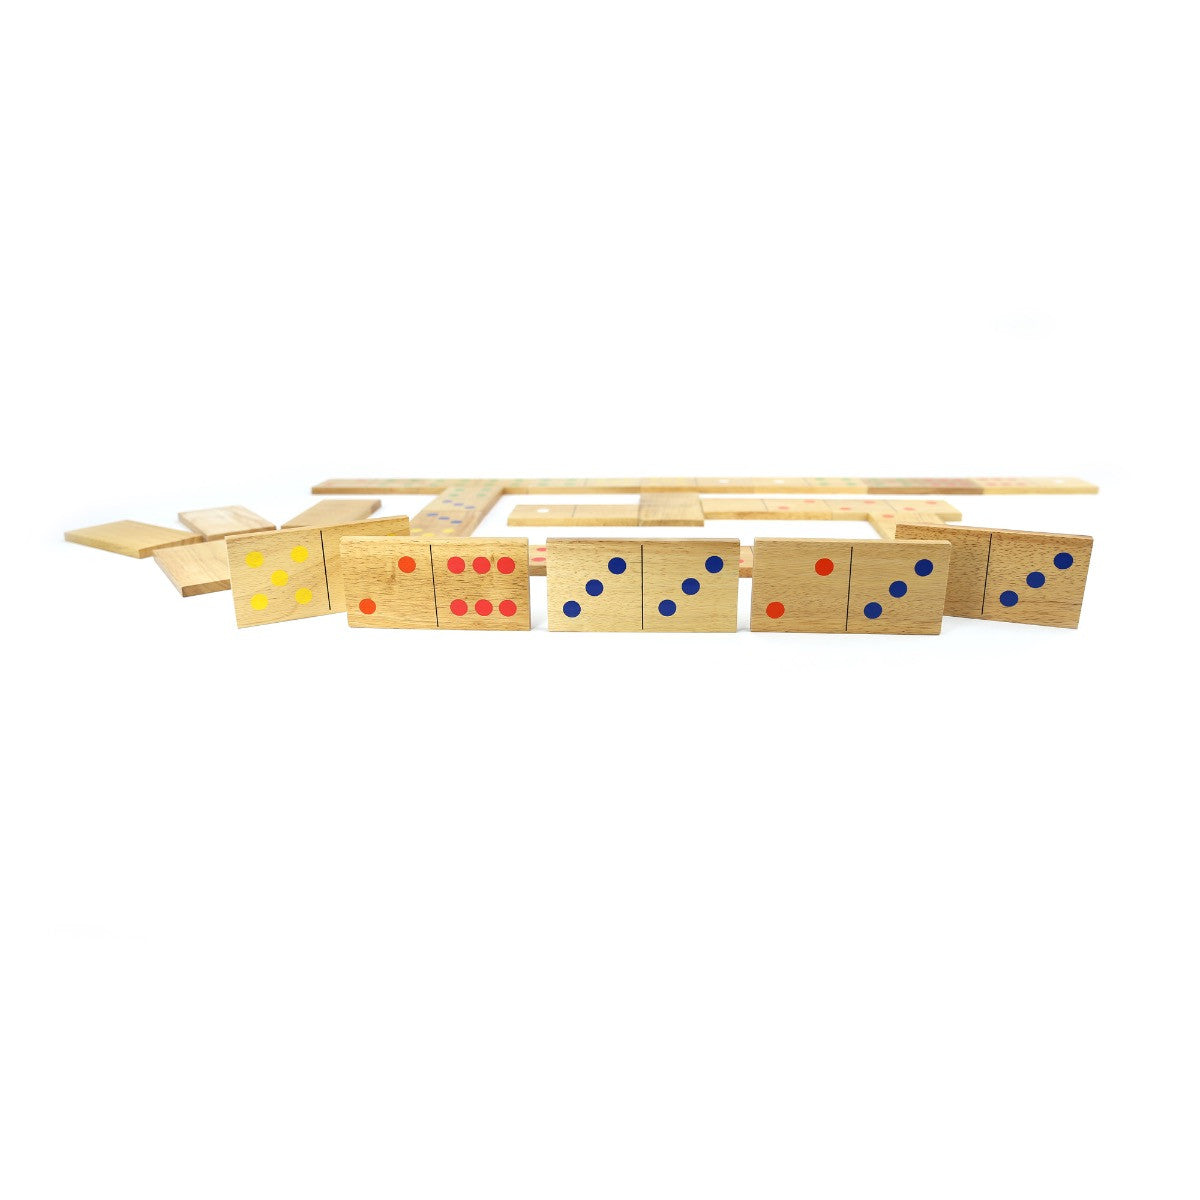 Giant Wooden Dominoes (Color Pips)